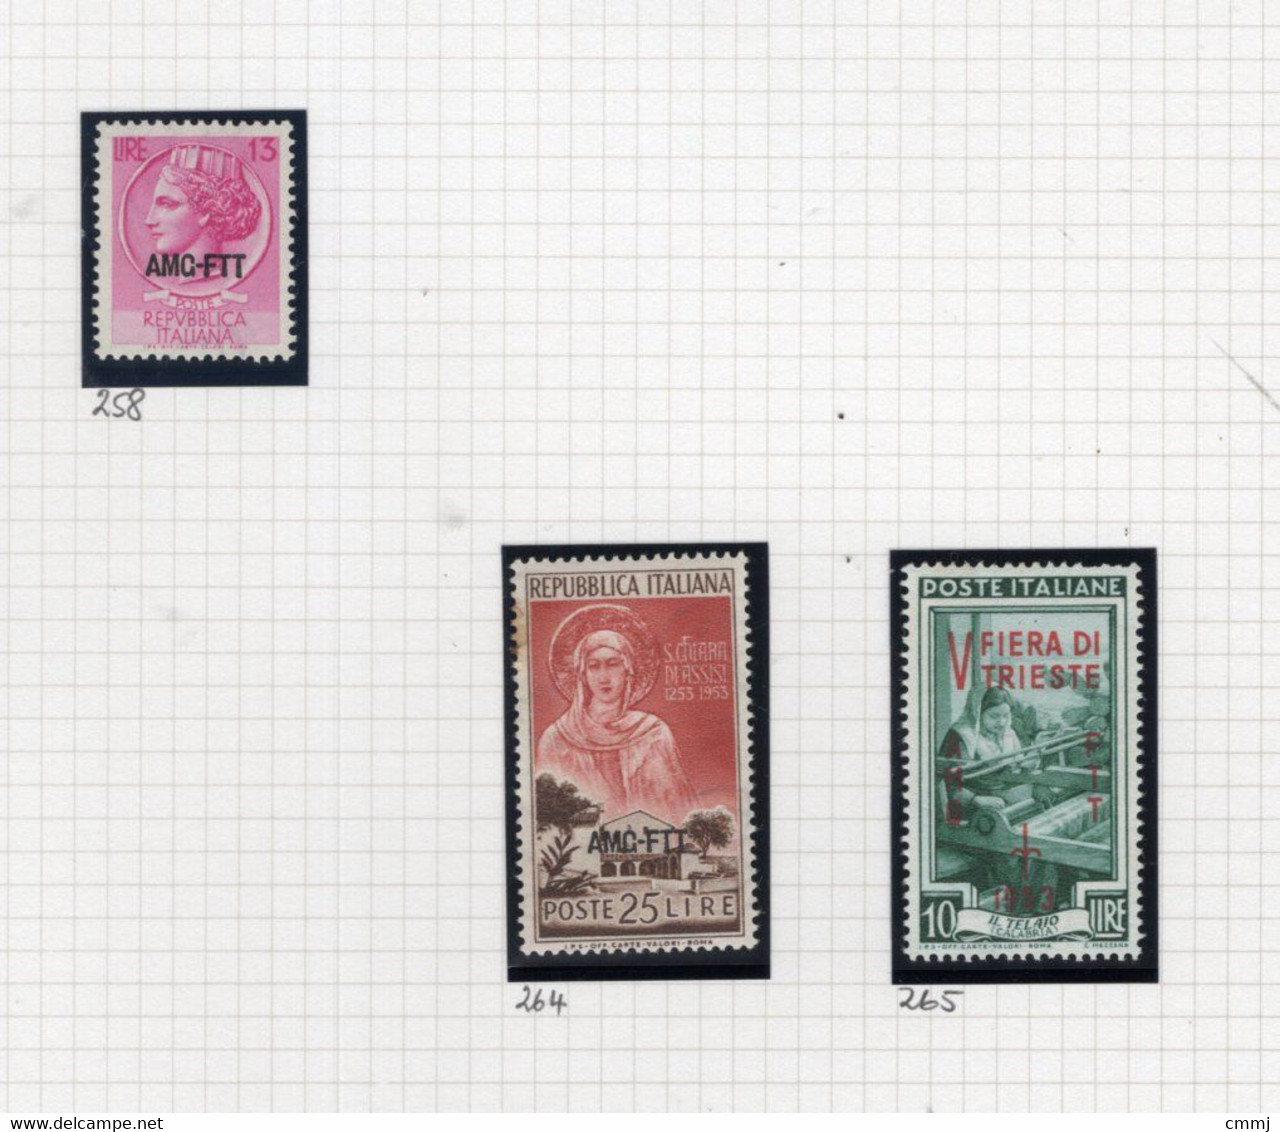 1947 -  Italia - Italy - - TRIESTE A - Sass. N.  LOTTO  - LH/NH/USED -  (J015.....) - Postage Due